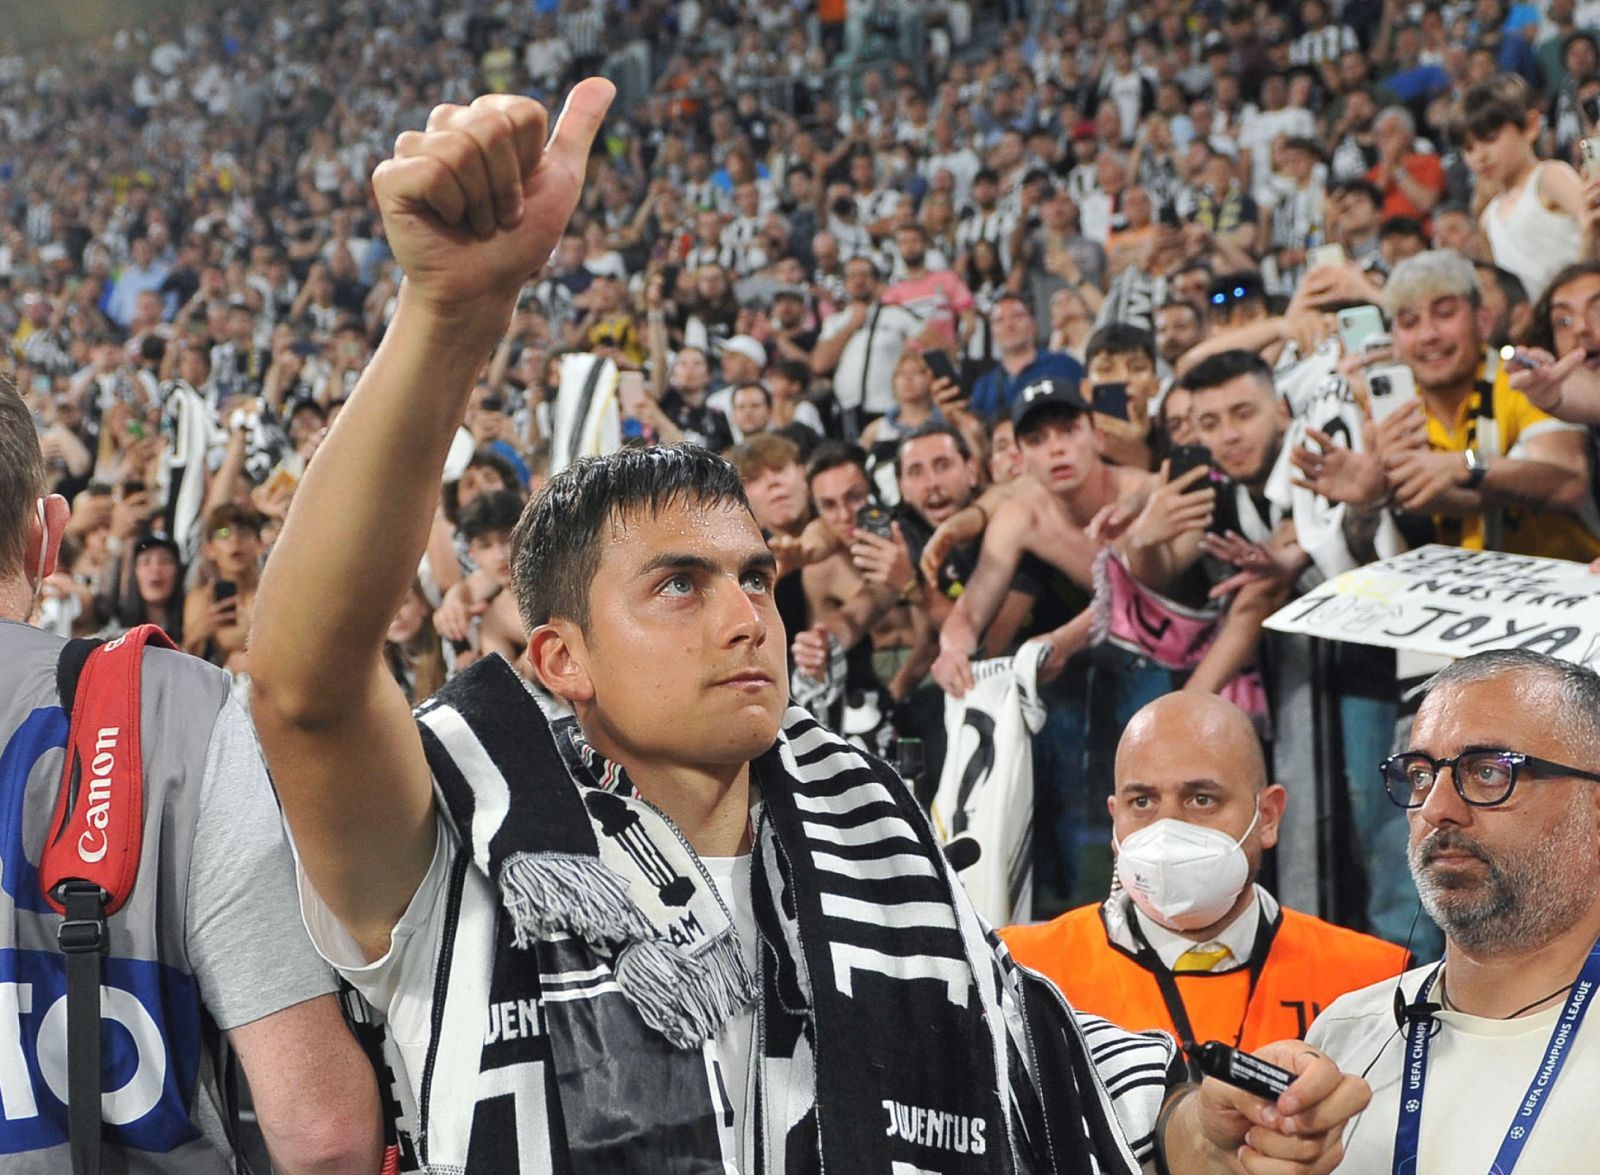 epa09951900 Juventus' Paulo Dybala greets the fans during the Italian Serie A soccer match Juventus FC vs SS Lazio at the Allianz Stadium in Turin, Italy, 16 May 2022. Paulo Dybala is leaving Juventus at the end of the season.  EPA/ALESSANDRO DI MARCO